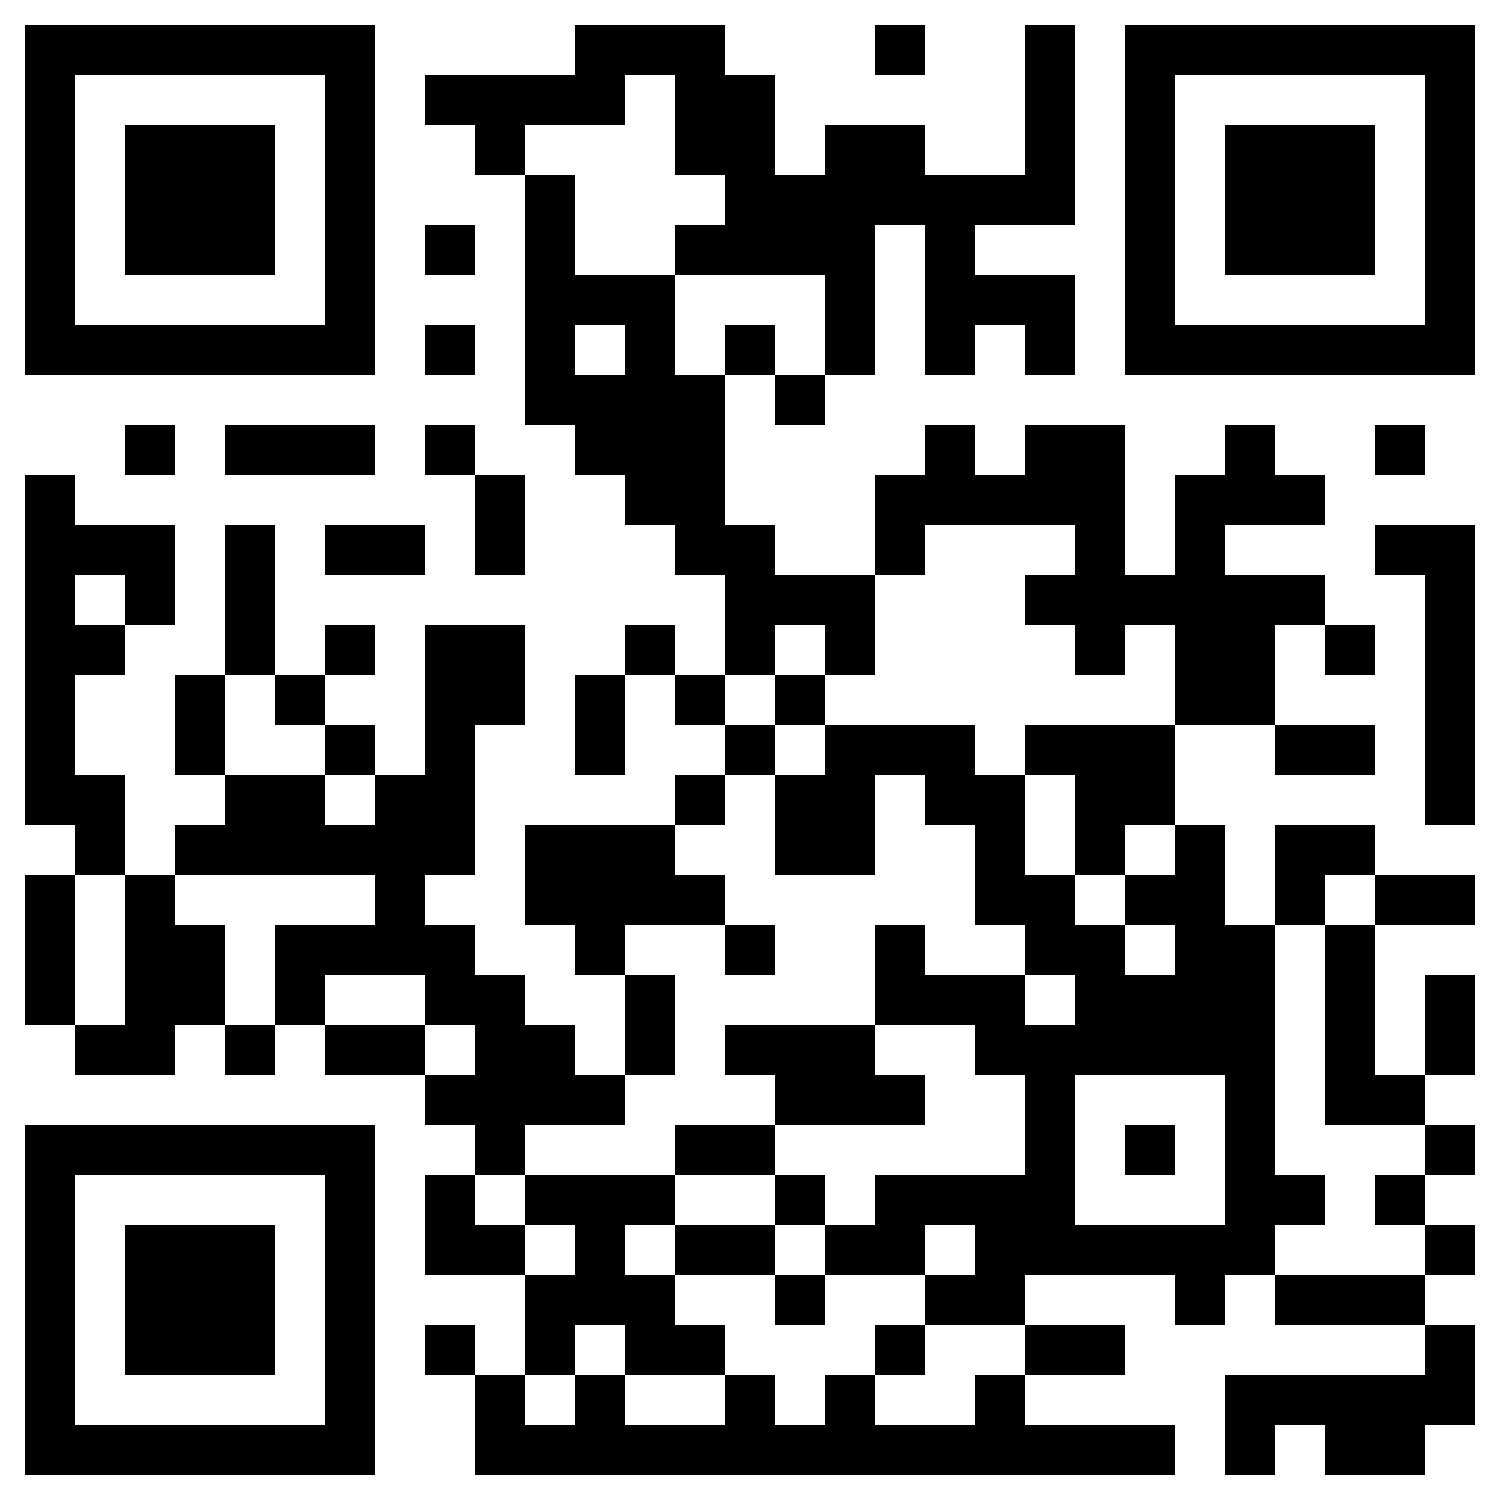 qrcode_19164416_.png